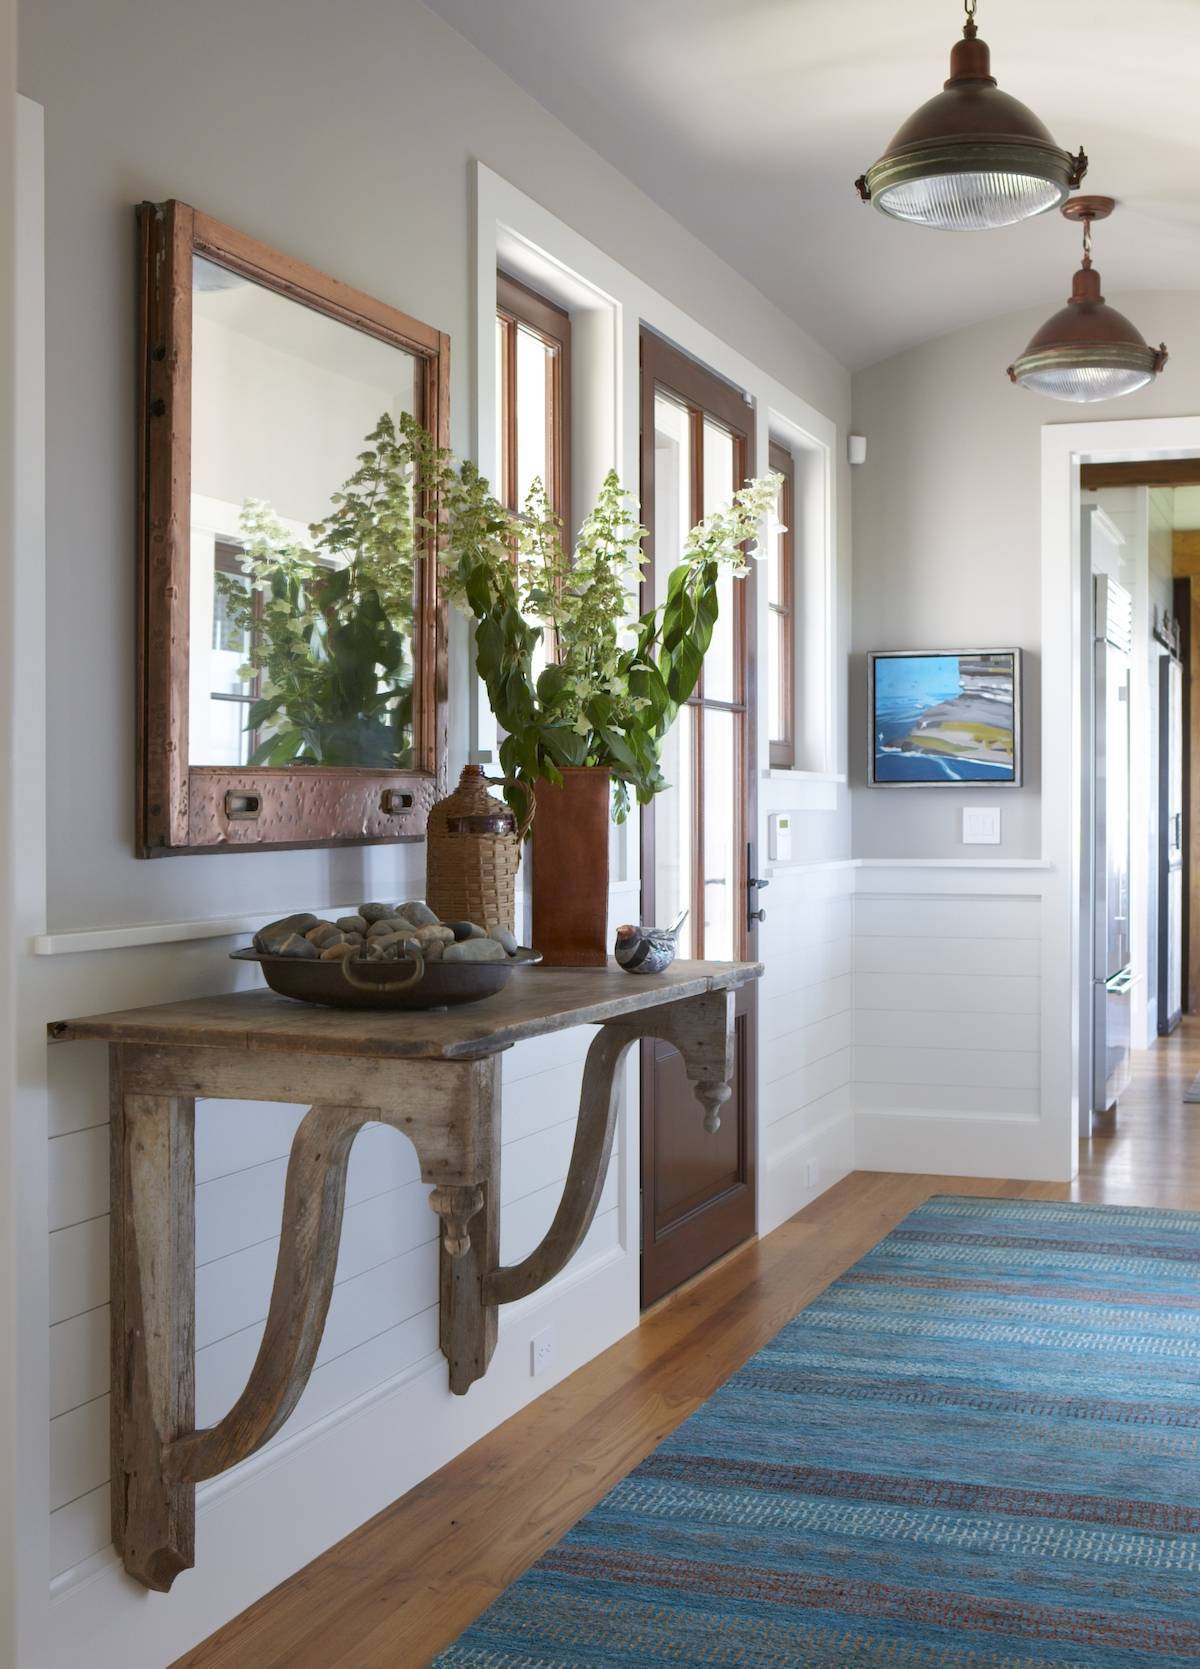 Area rugs in front of an accent table in an entryway